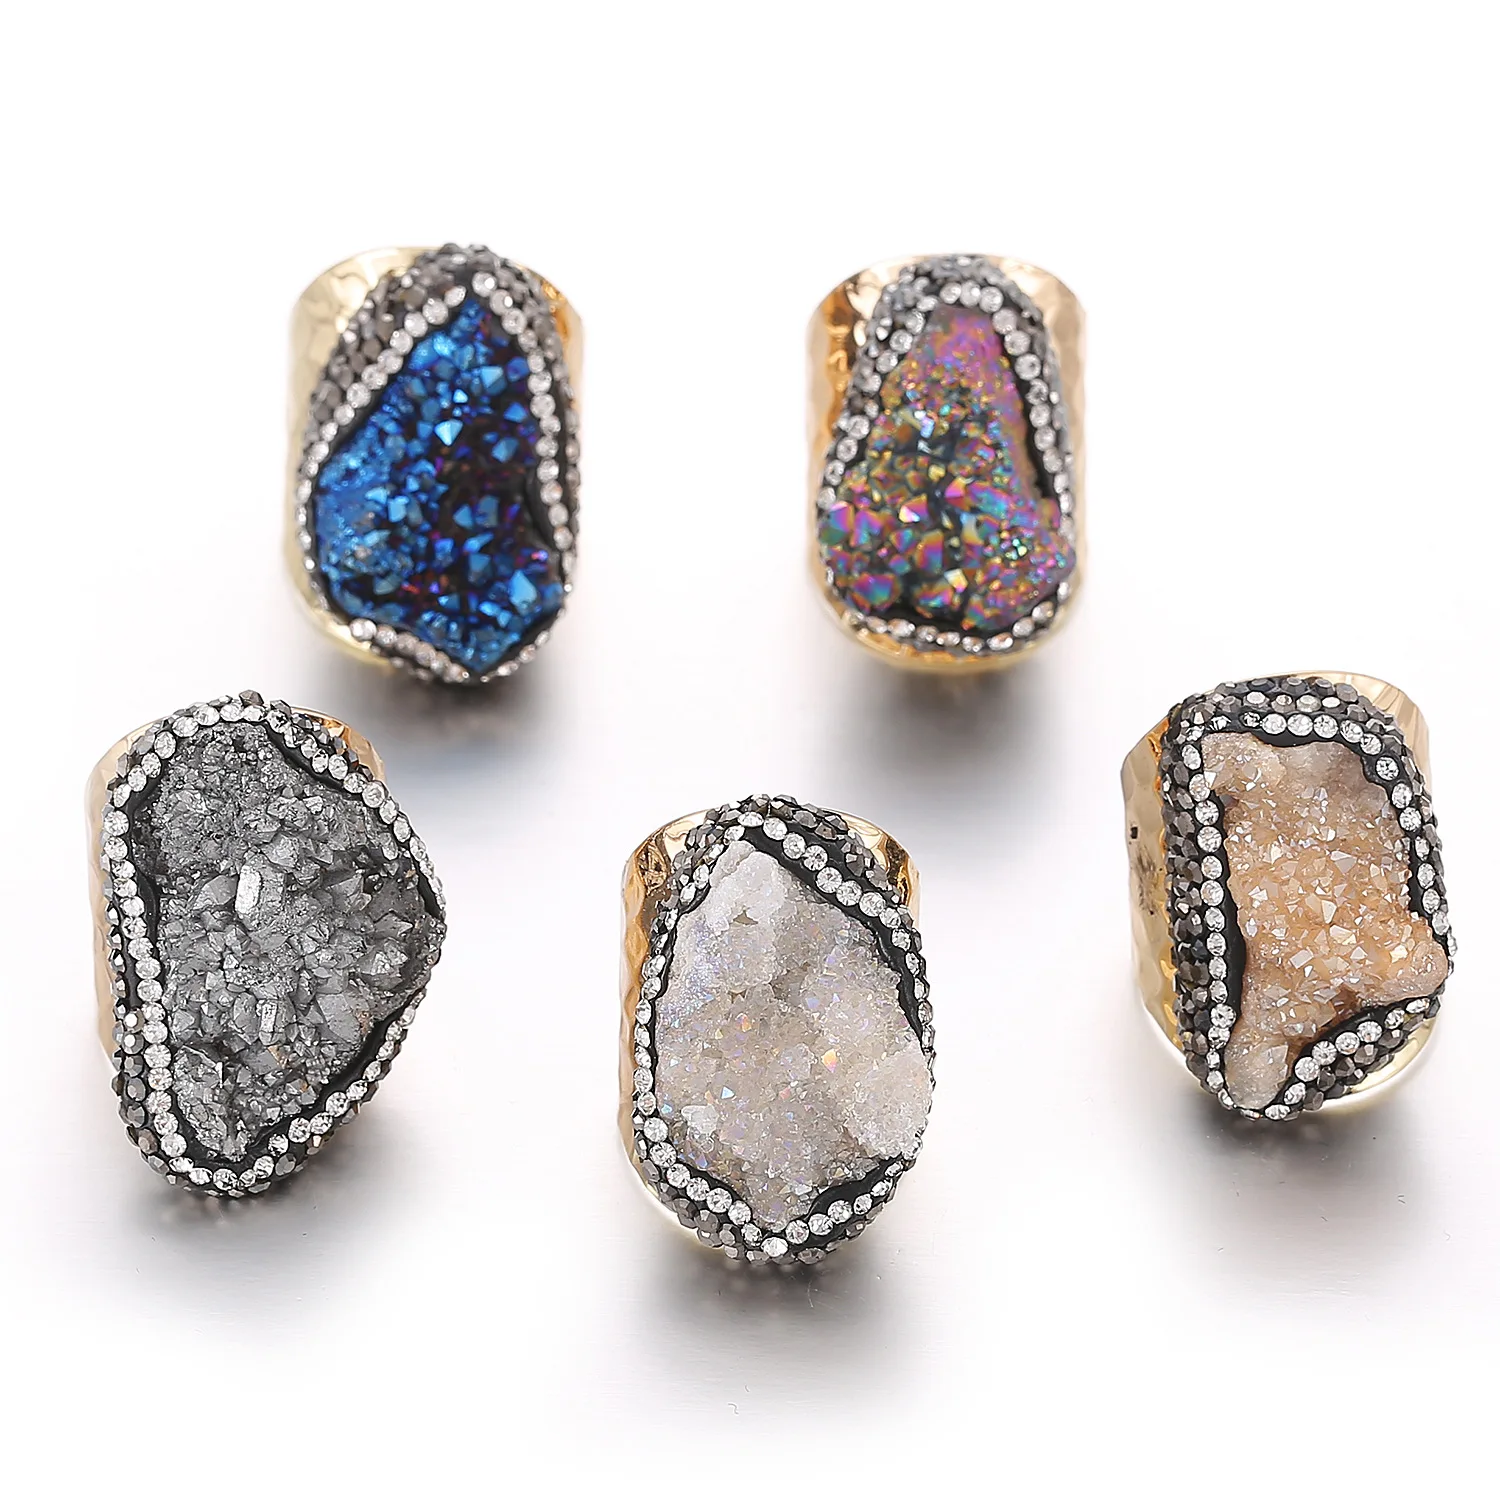 

Wholesale Natural Stone Natural Crystal Cluster Druzy Diamond Ring for Men Women Quartz Gemstone Opening Ring Jewelry